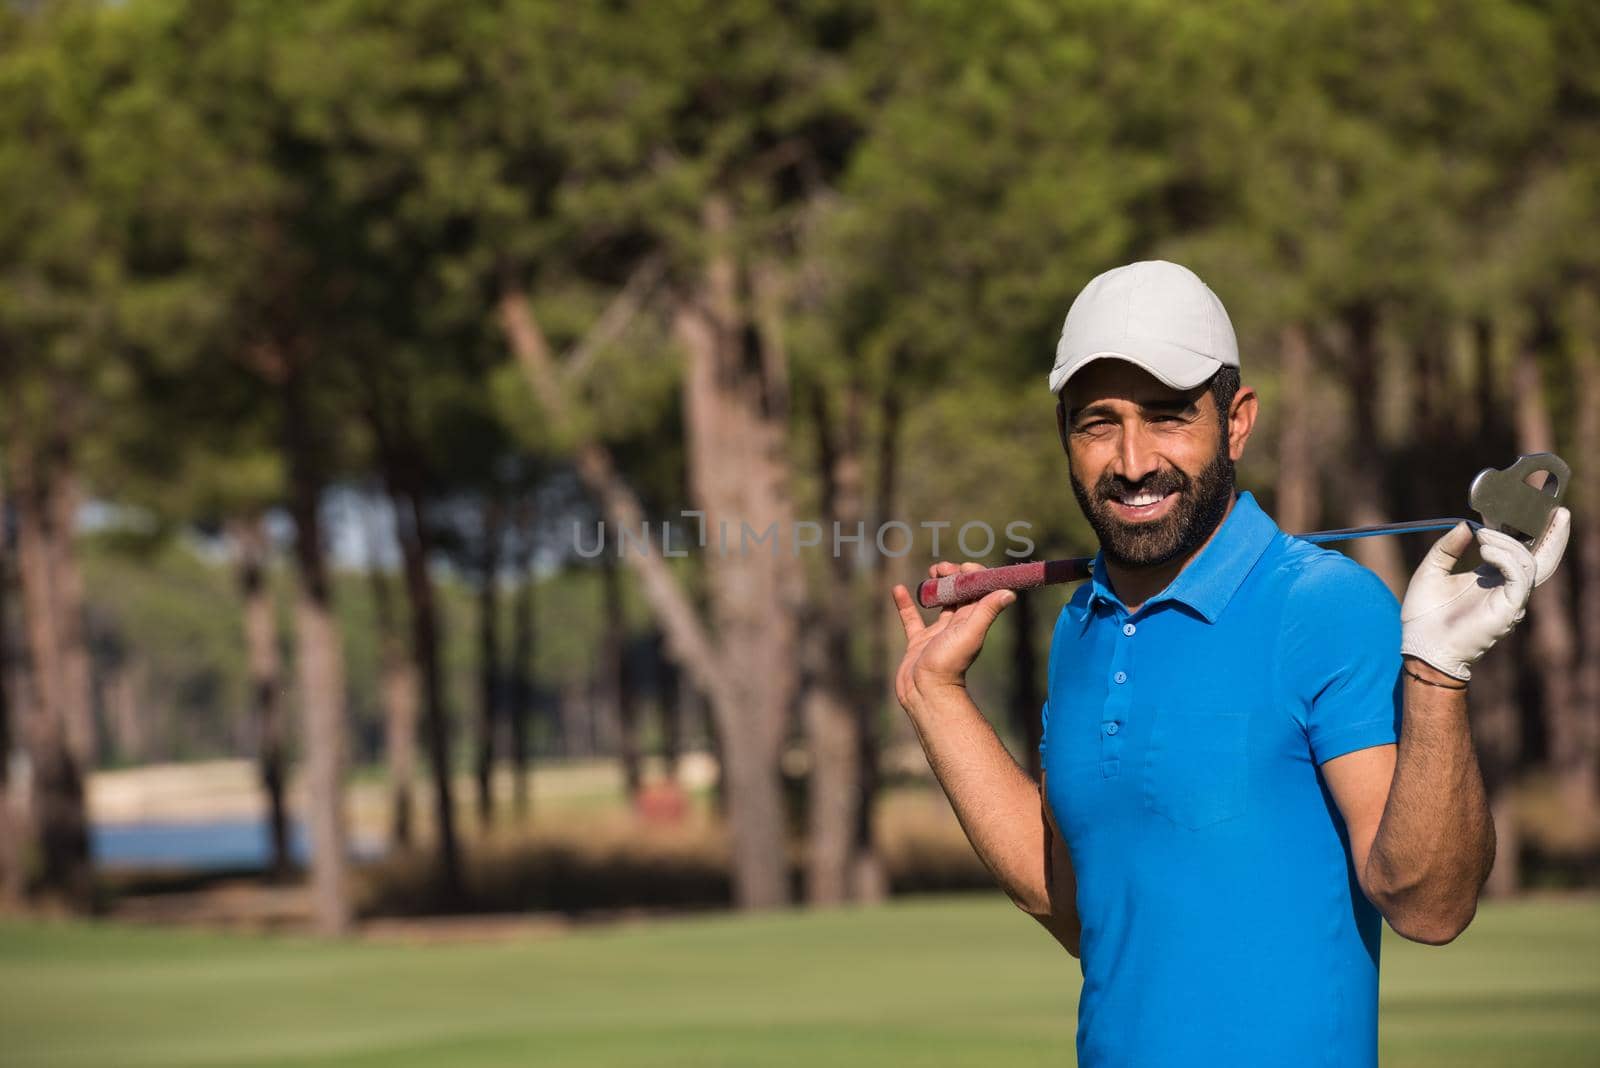 golf player portrait at course by dotshock